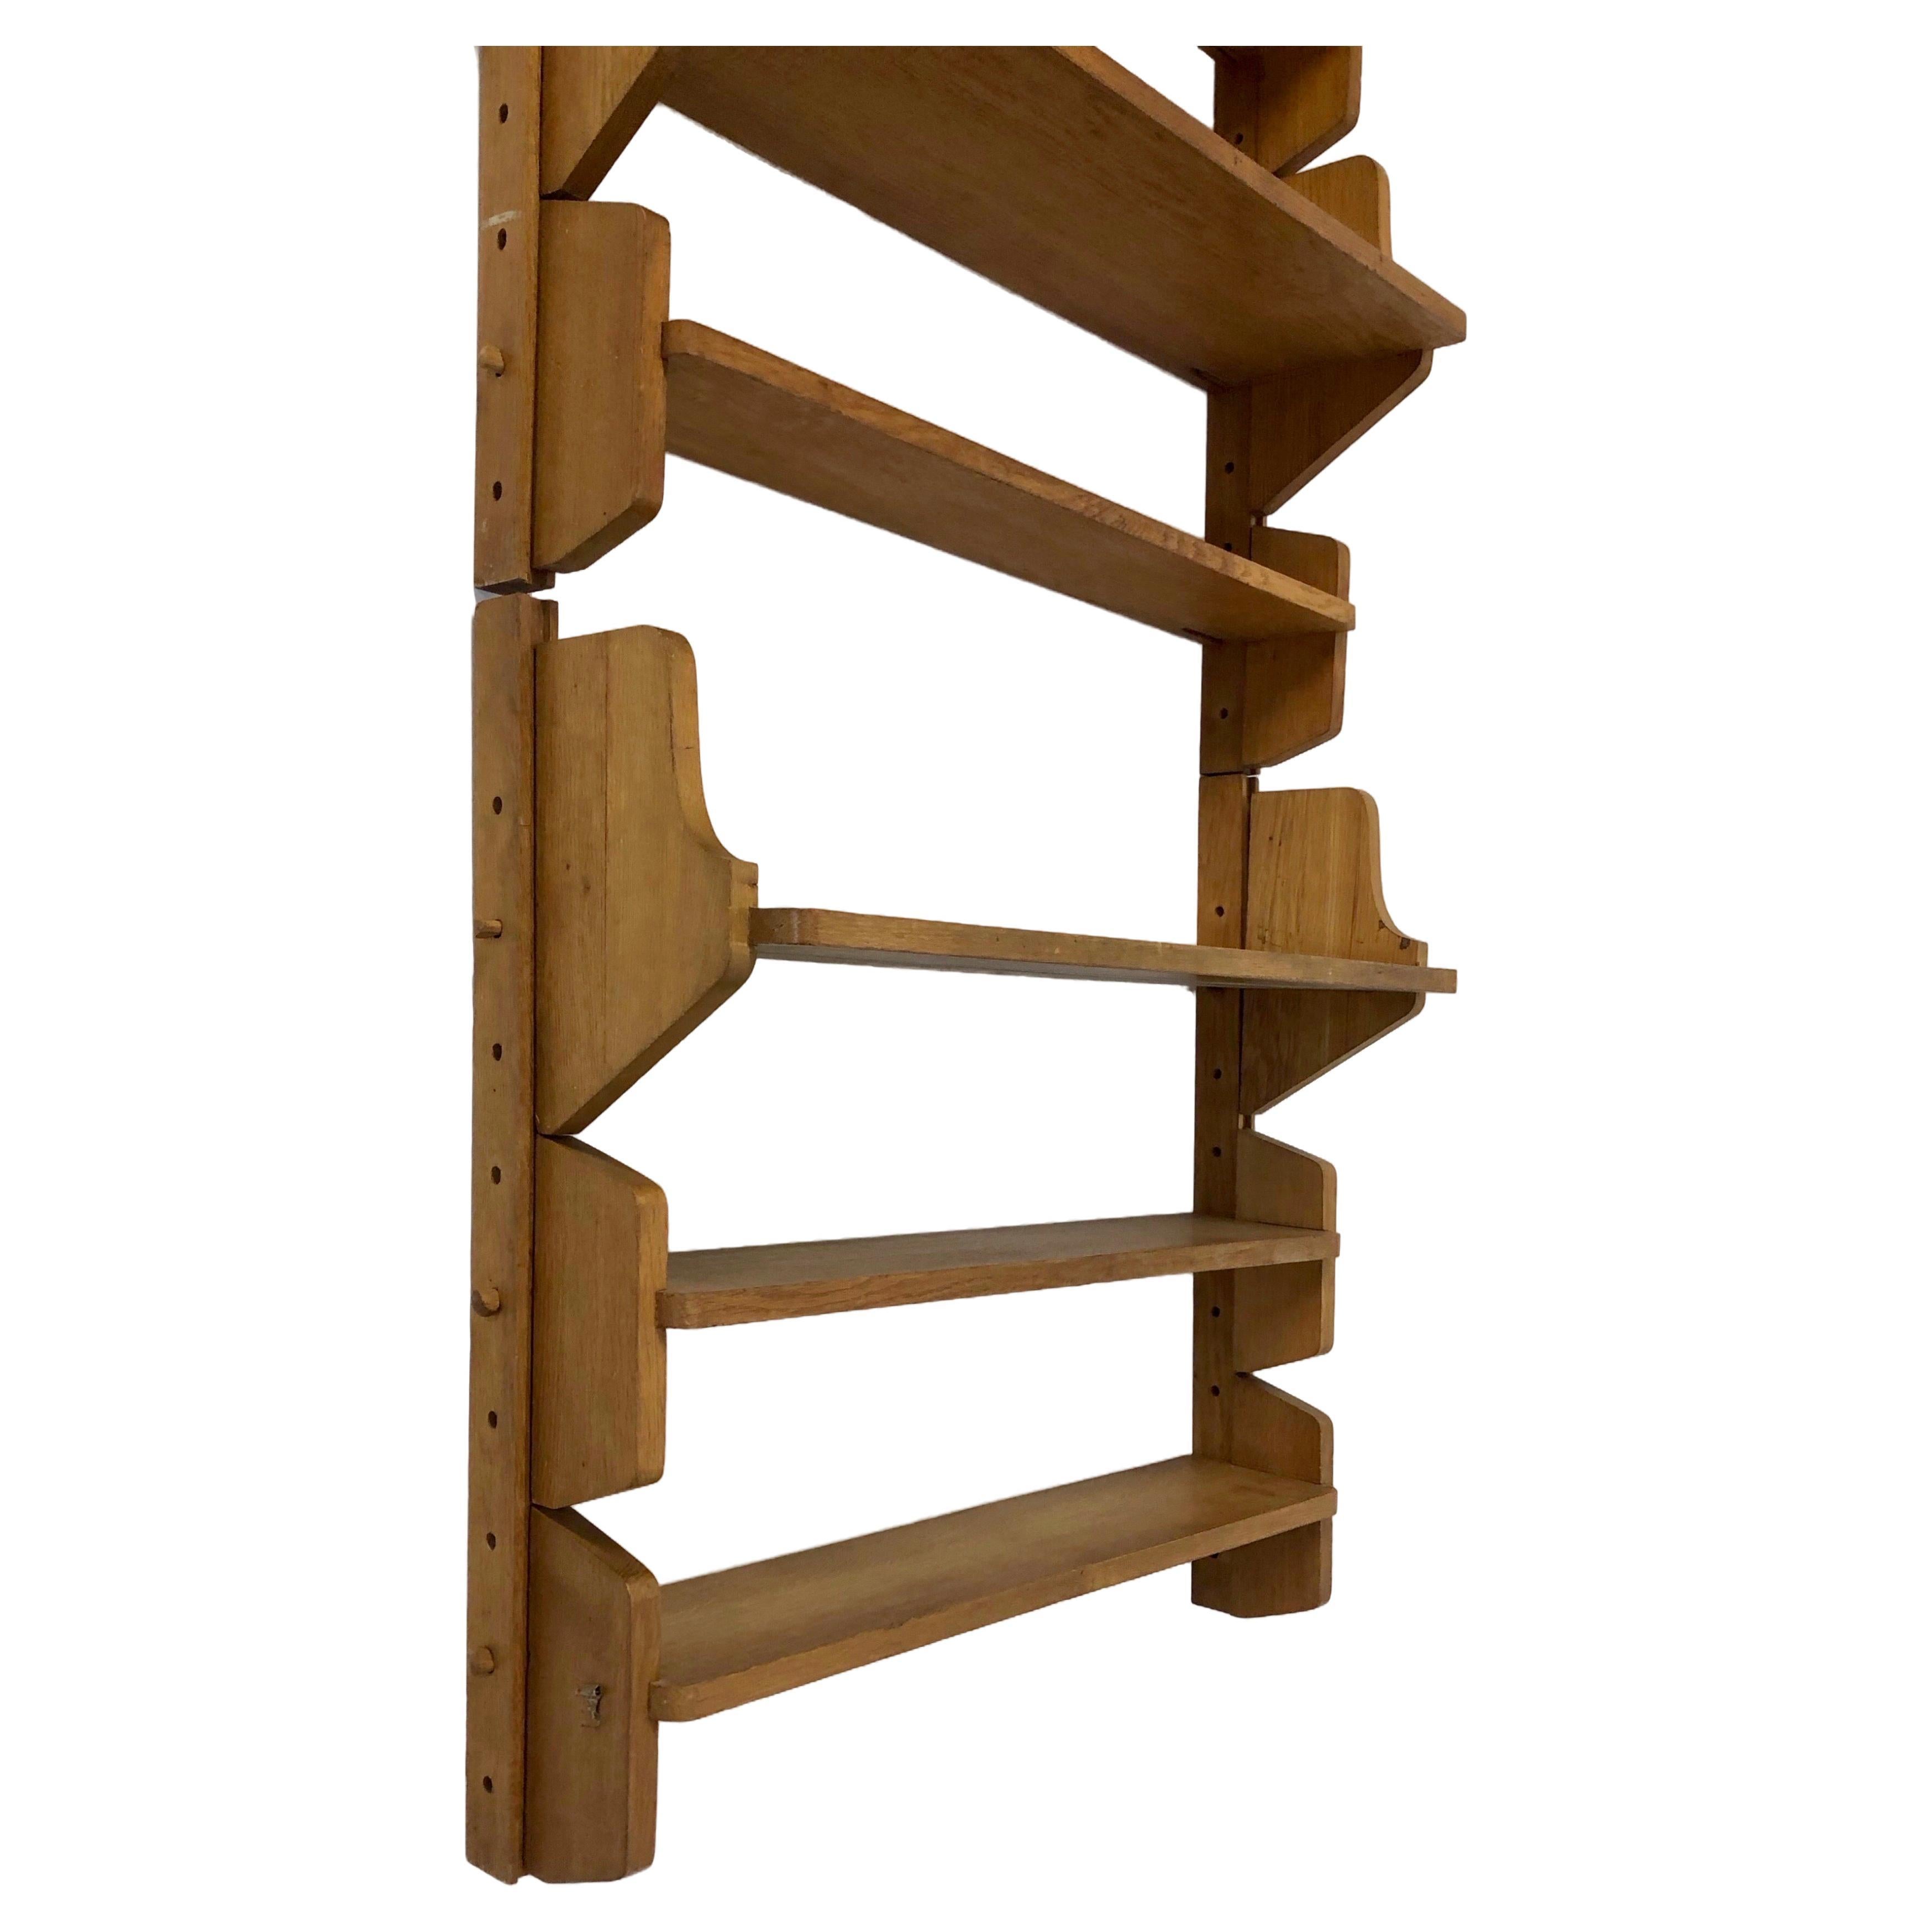 A set of two modular shelves designed by Emile Seigneur, a designer of the French reconstruction era. 

The two shelves are independent but are shown here stacked on top of each other. Each shelf consists of two vertical oak supports and three